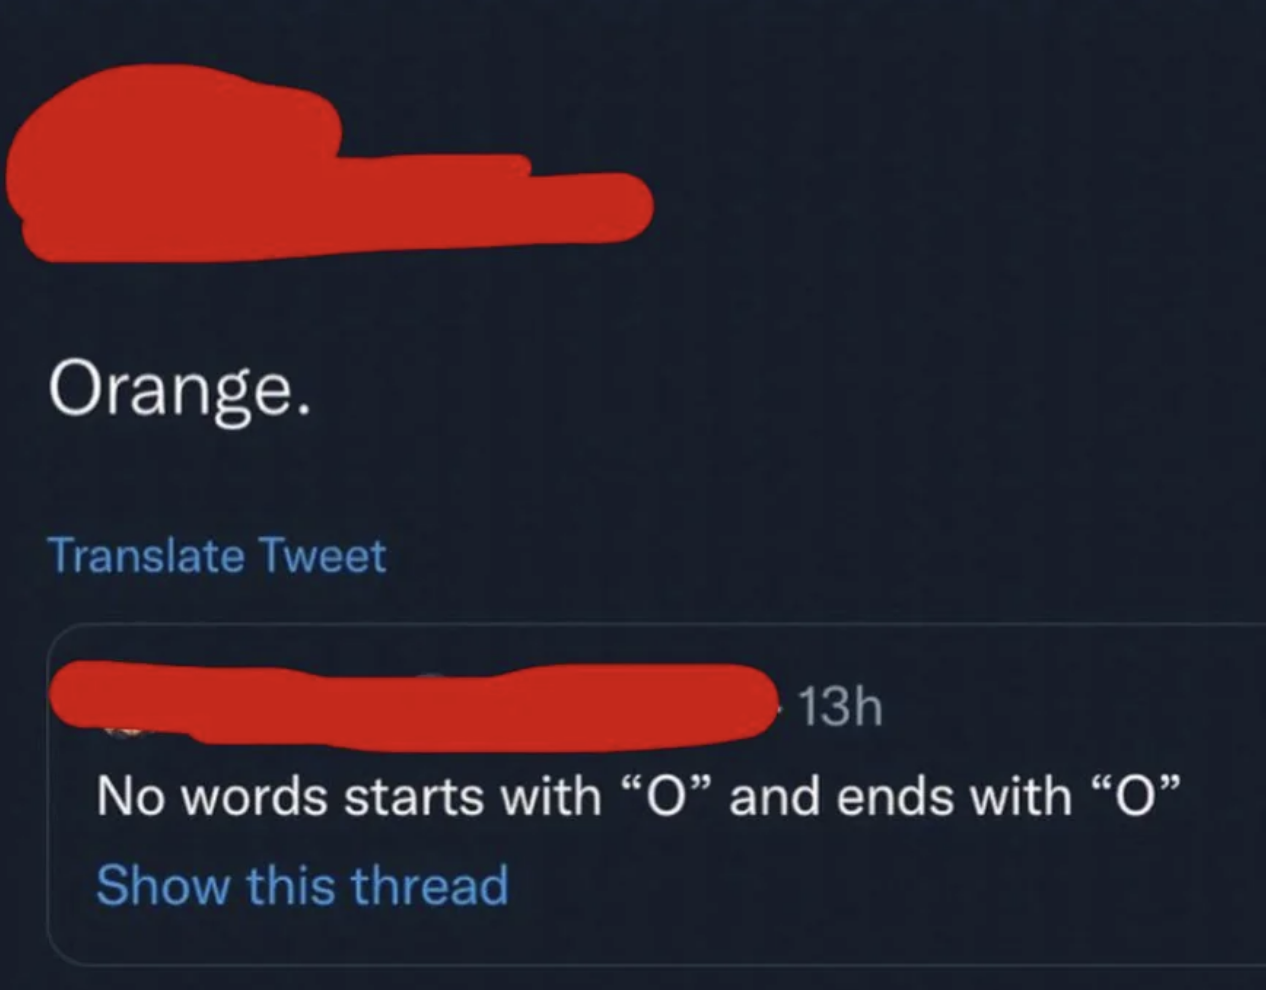 &quot;No words starts with &#x27;O&#x27; and ends with &#x27;O&#x27;&quot;